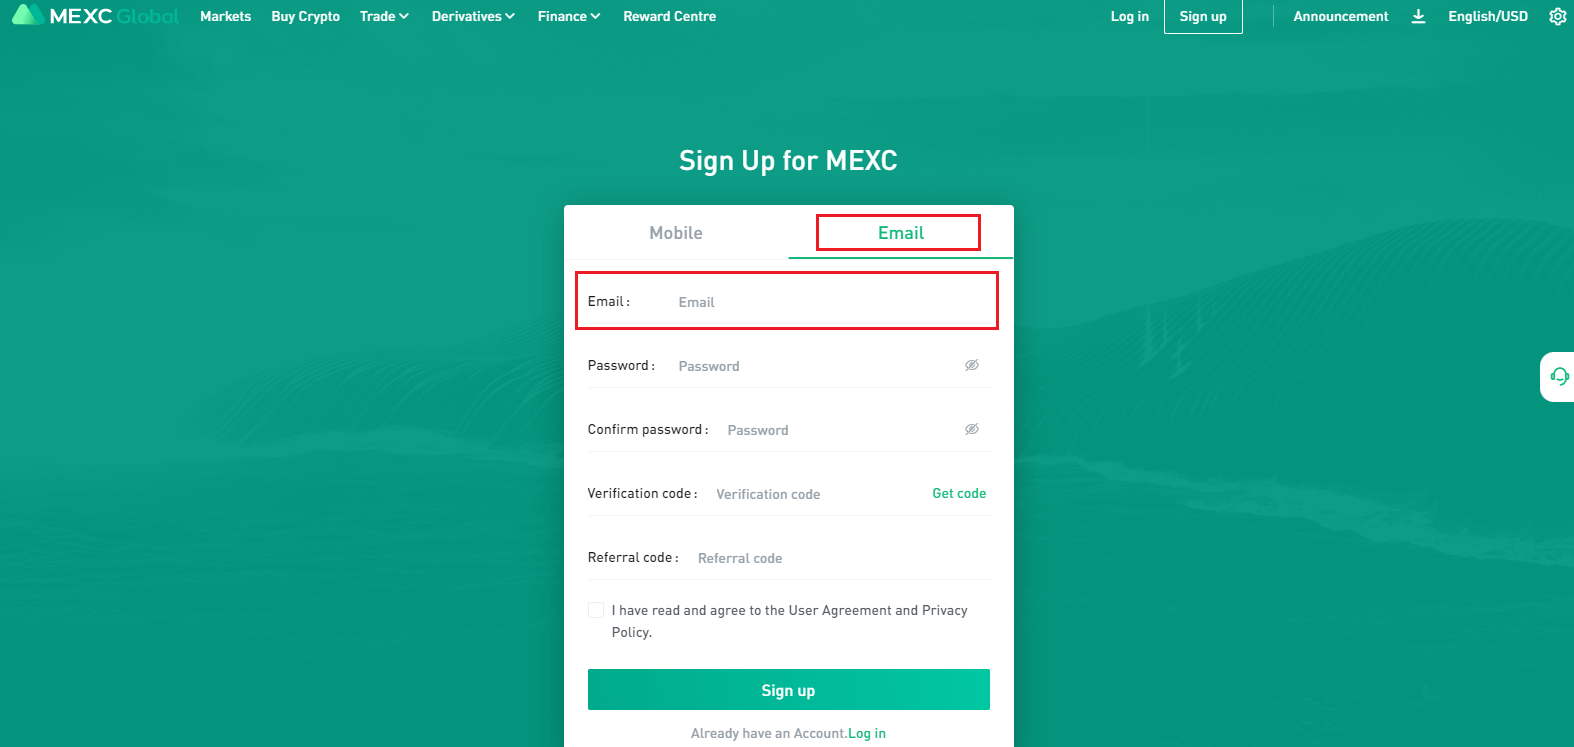 How to Open a Trading Account and Register at MEXC